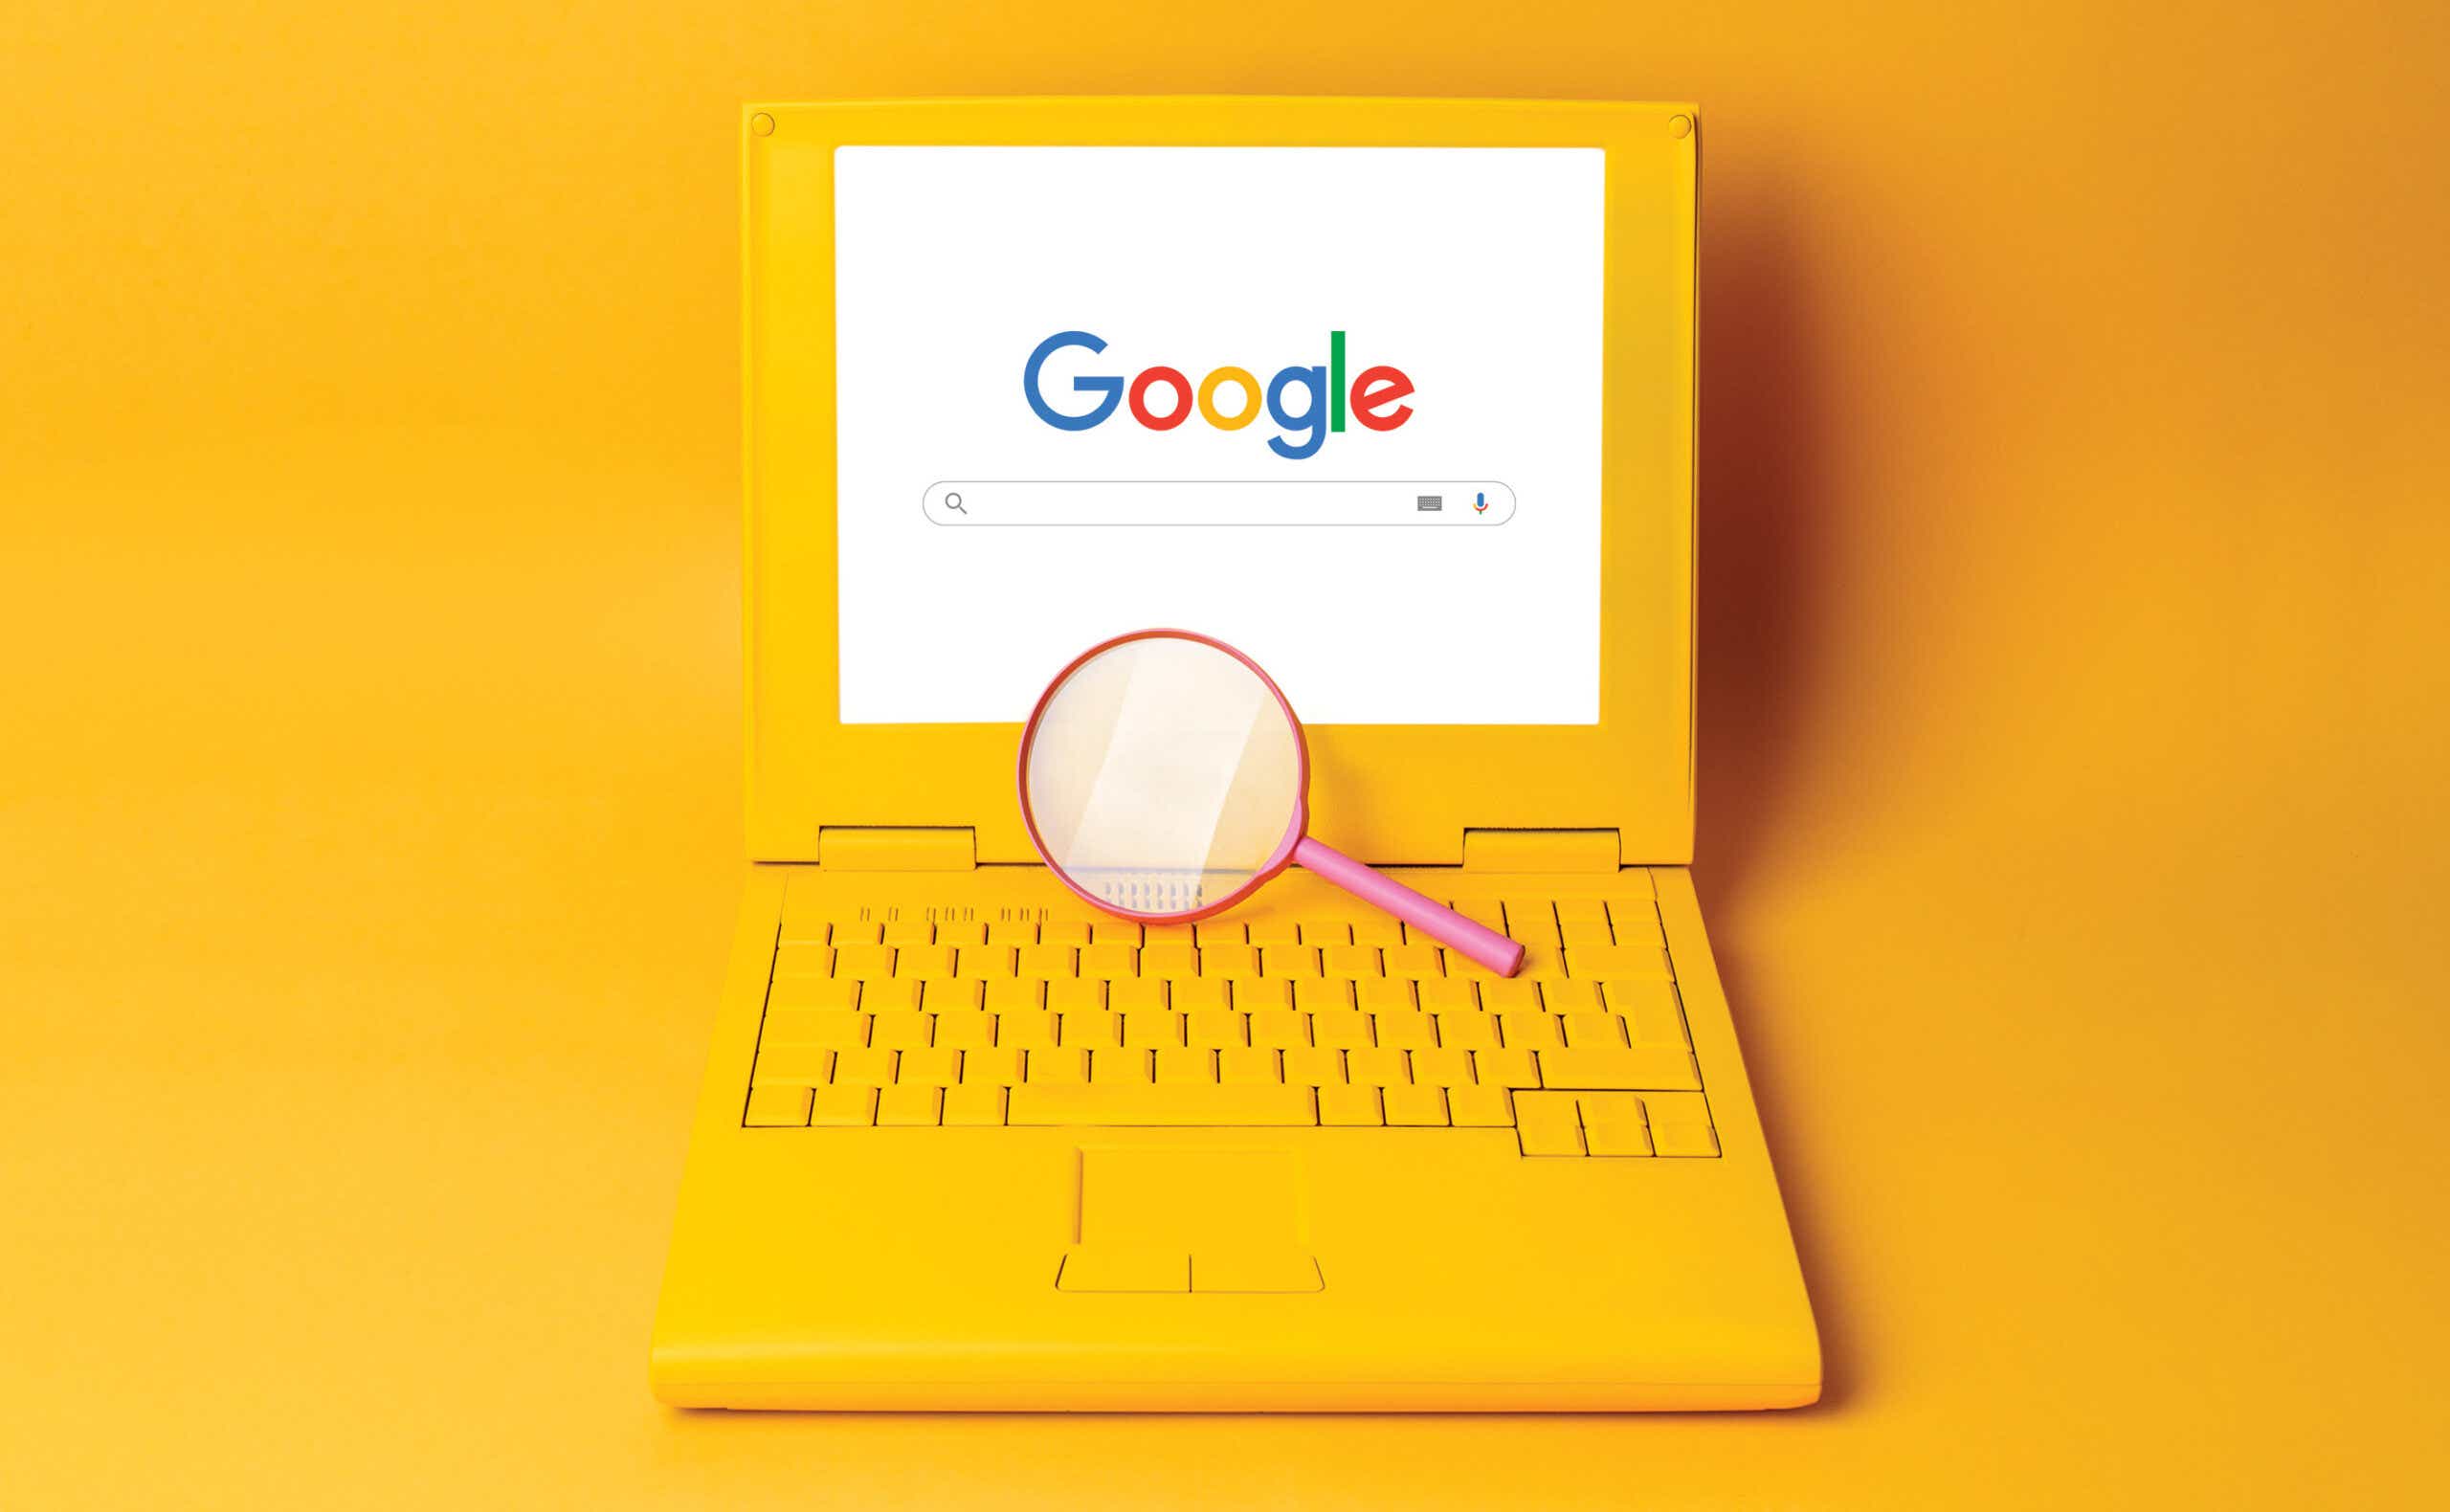 Google search on an orange laptop with a magnifying glass